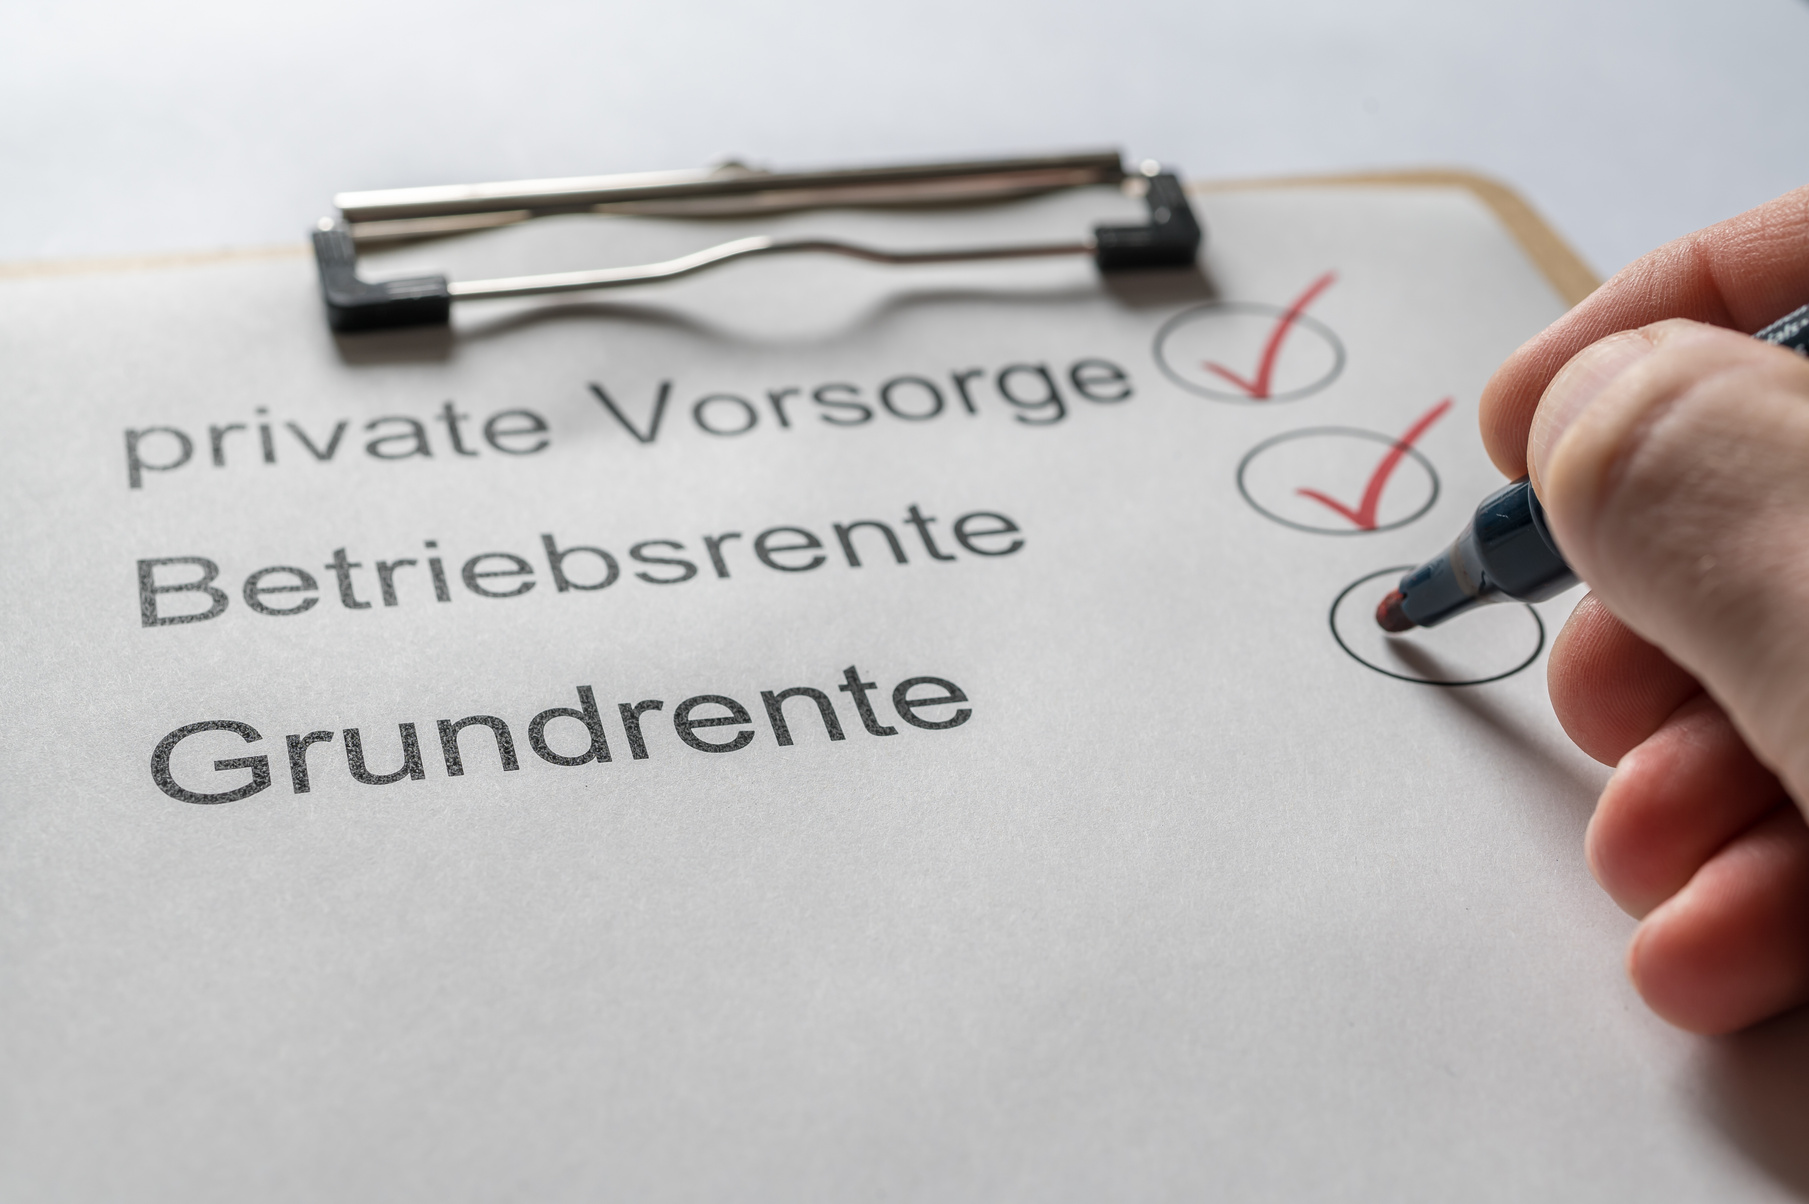 List of terms relating to retirement provision and basic pension in German language